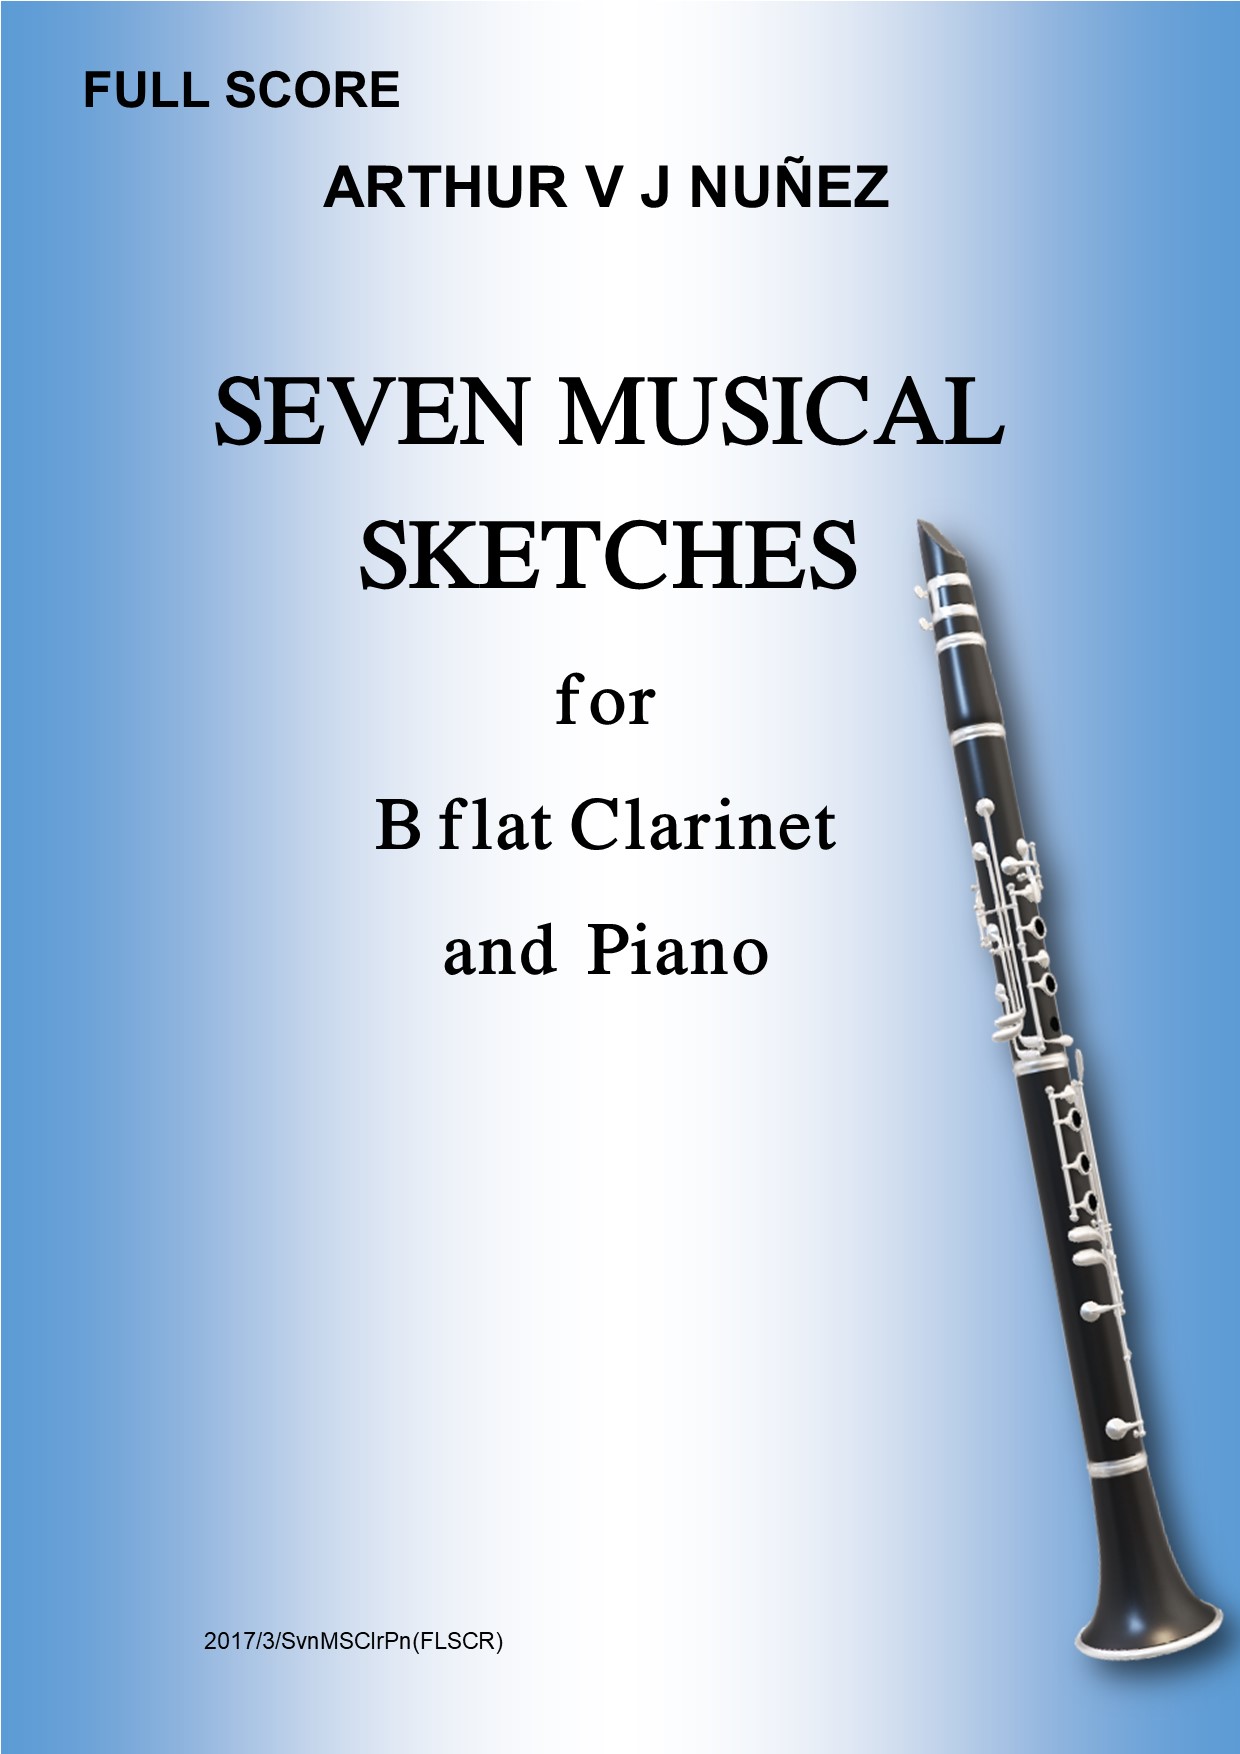 clarinet and piano – groovy-rascal